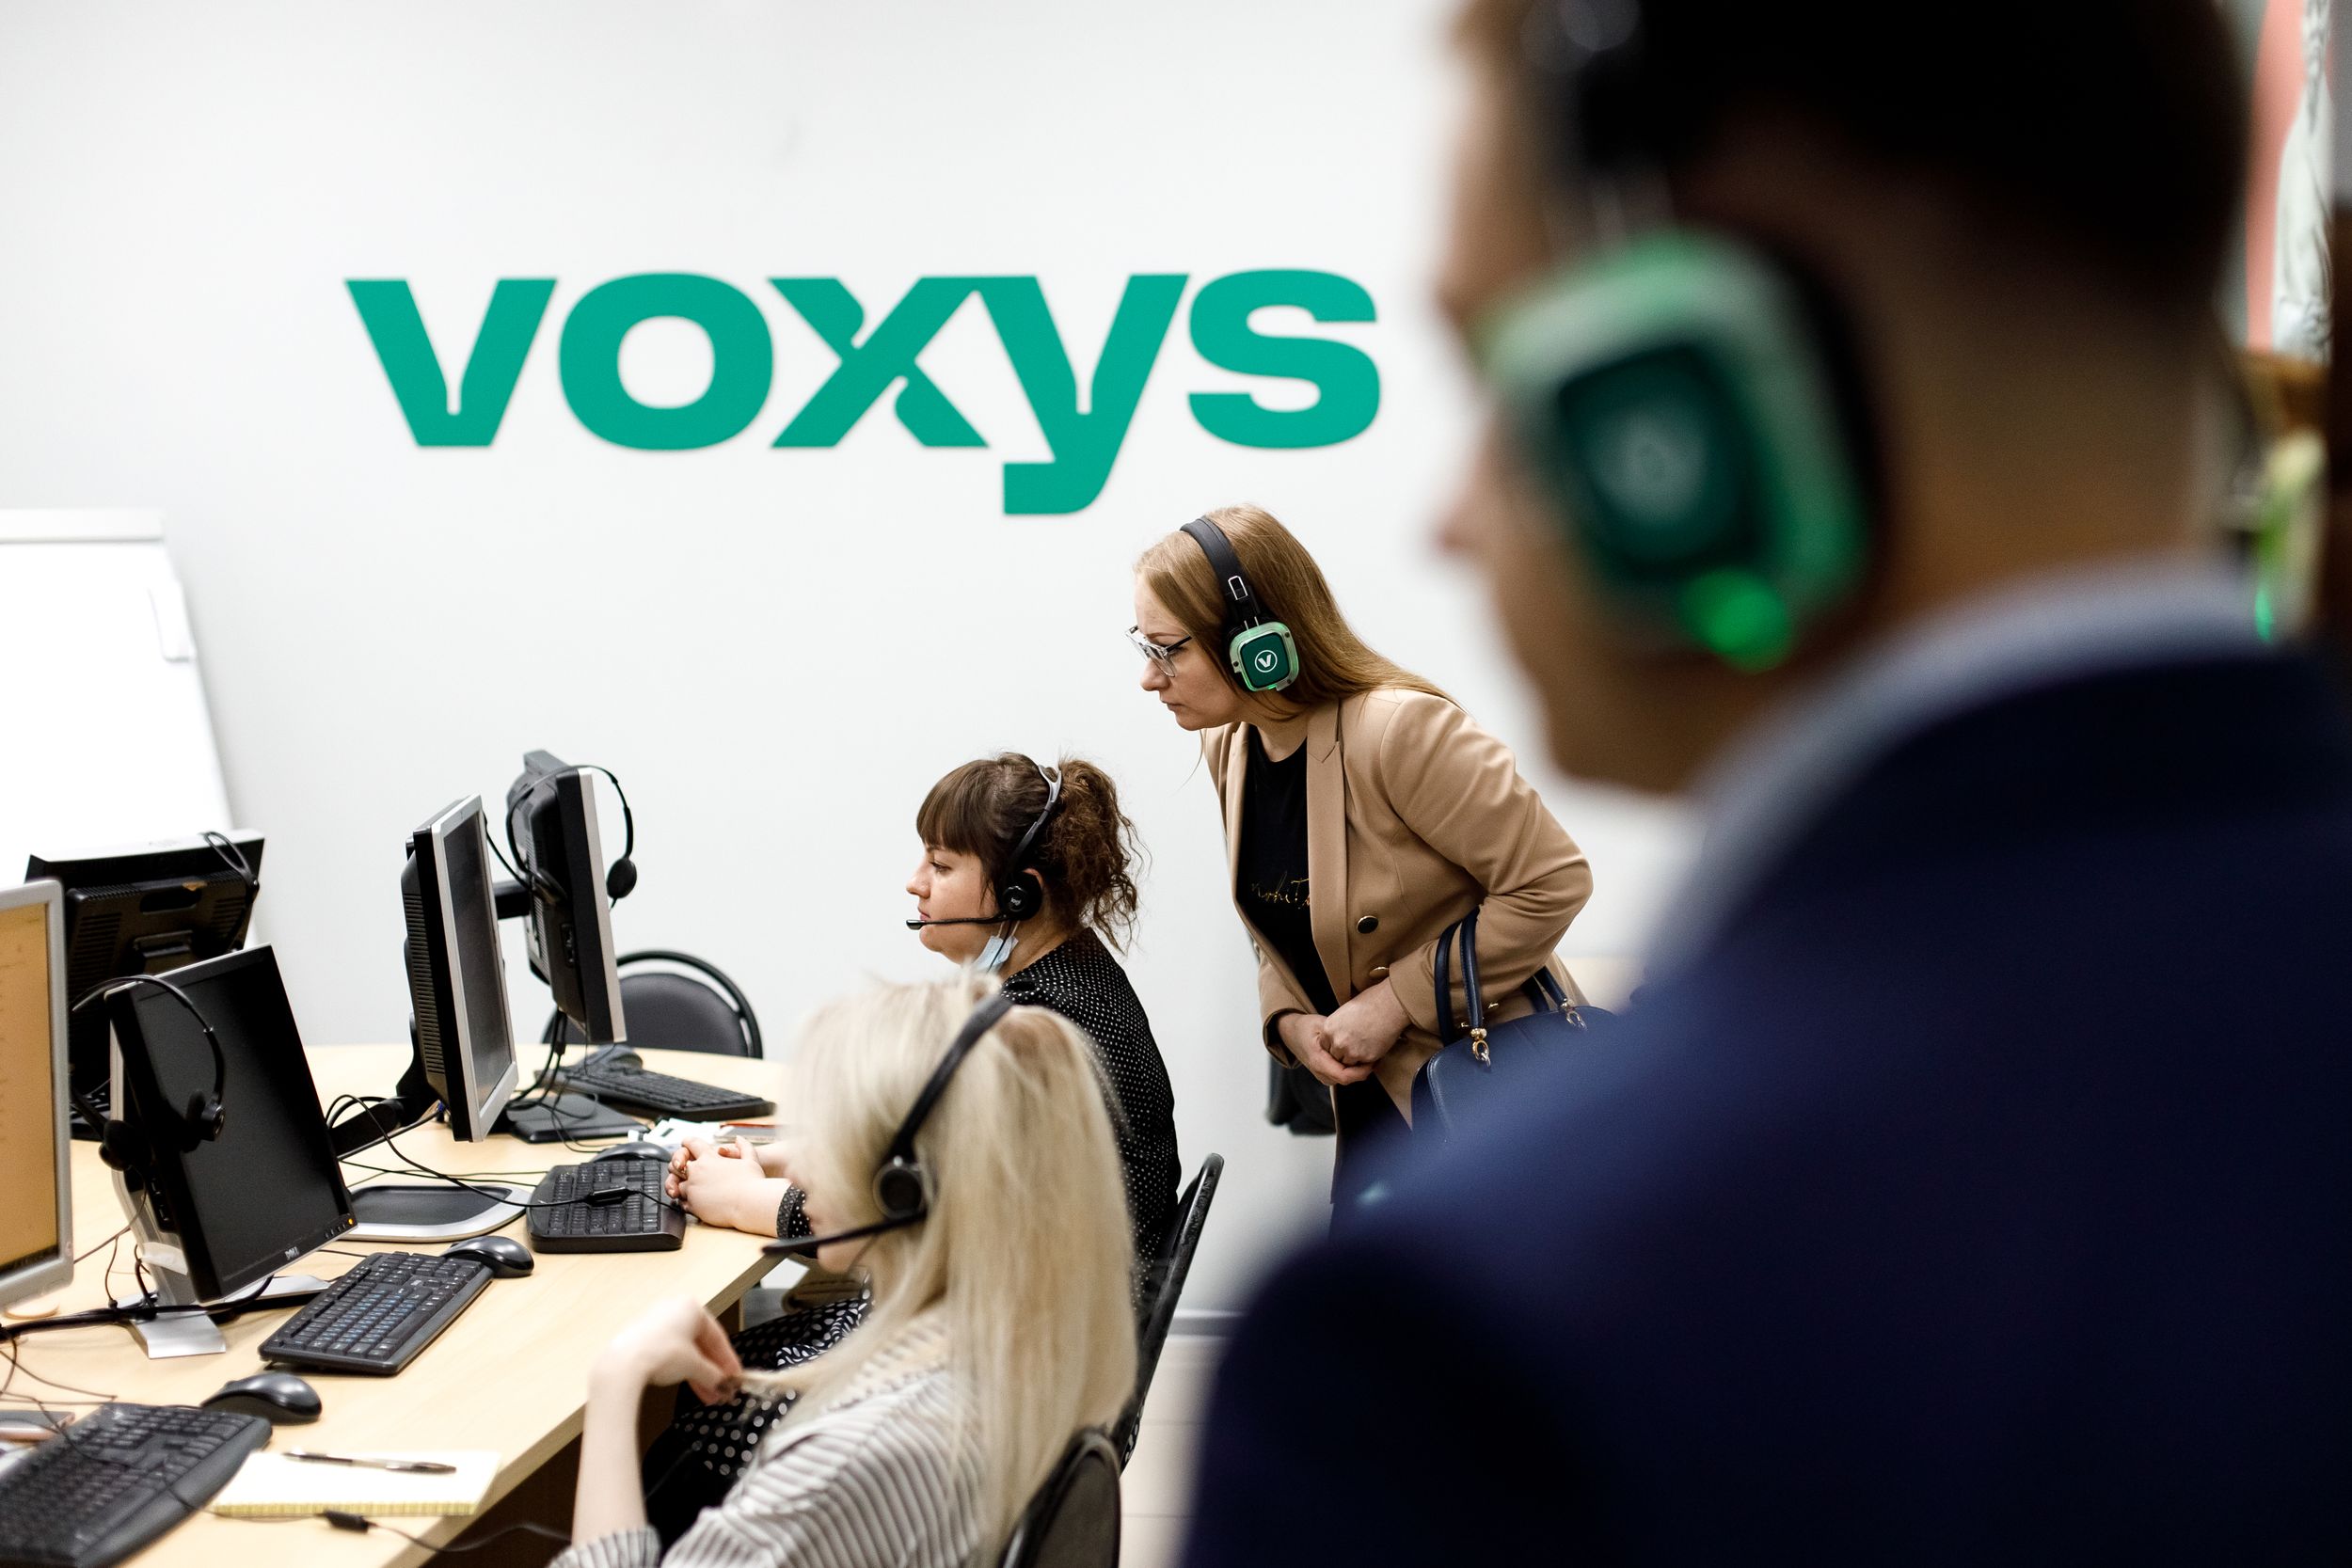 Leader status confirmed: VOXYS is the #1 on the Russian contact center market